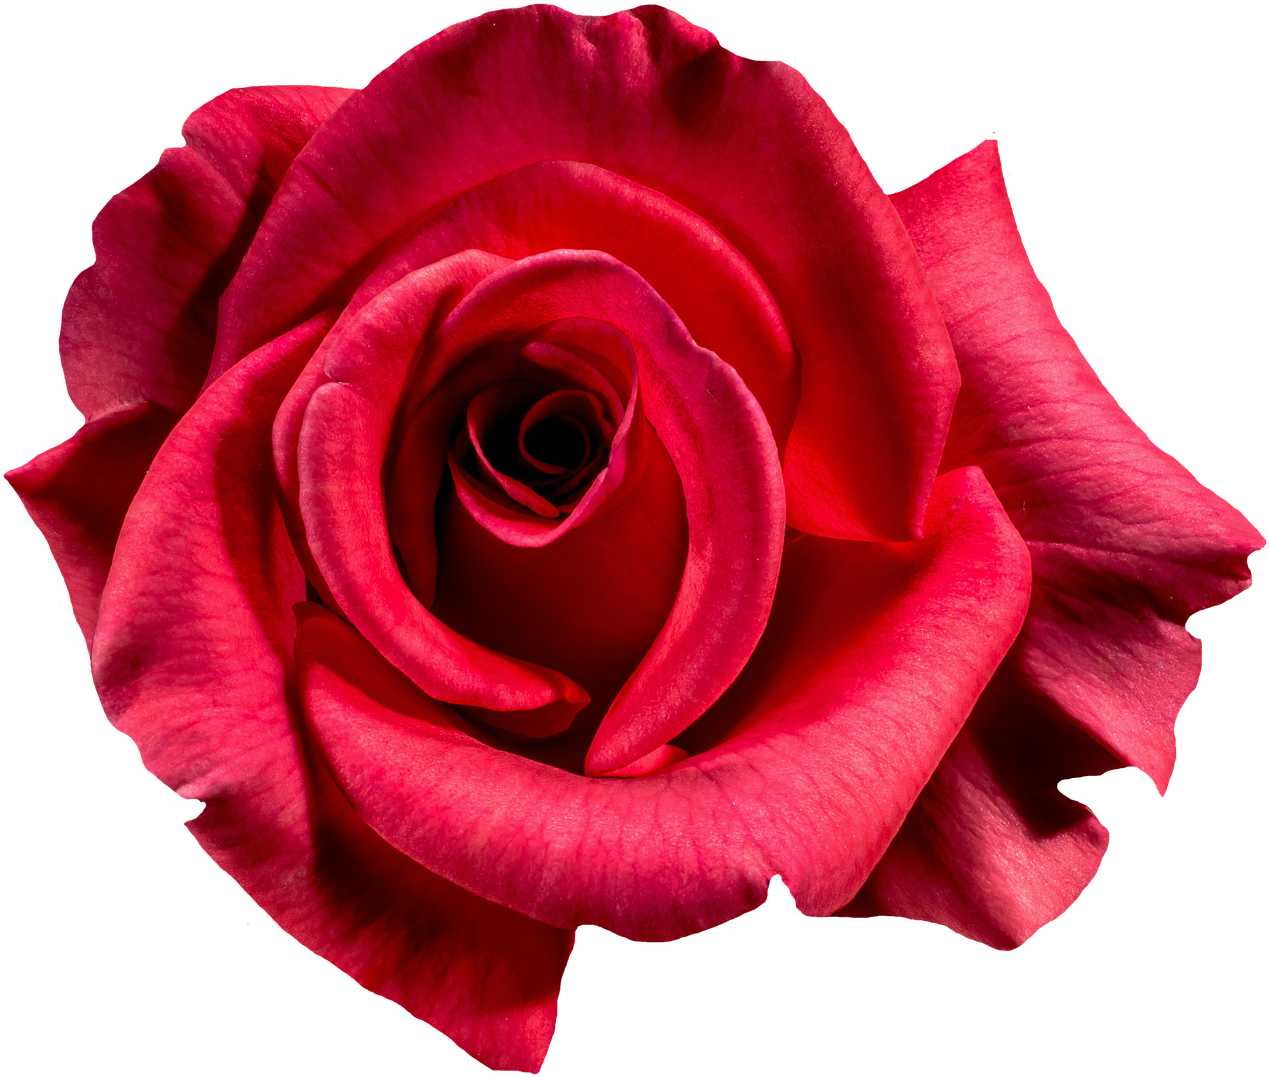 Rose Red Blossom Bloom Flower Png Image - Giant Single Red Rose Shirt Love Devotion Anniversary (1280x1096)